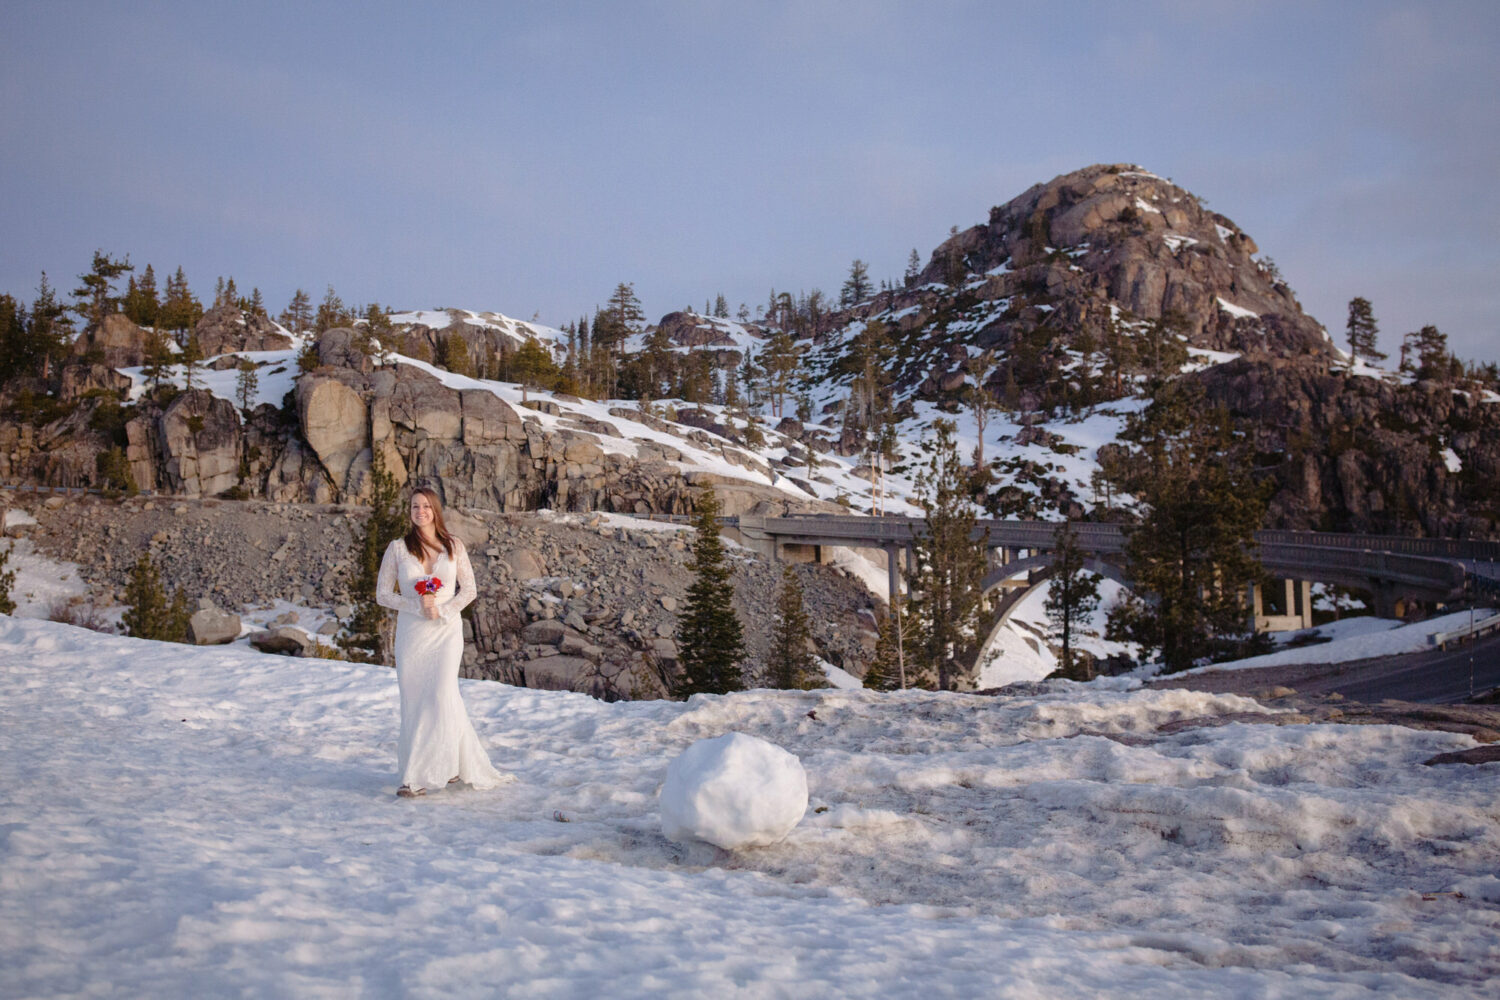 A bride walks across snow to her winter elopement in Tahoe with mountains visible in the background.